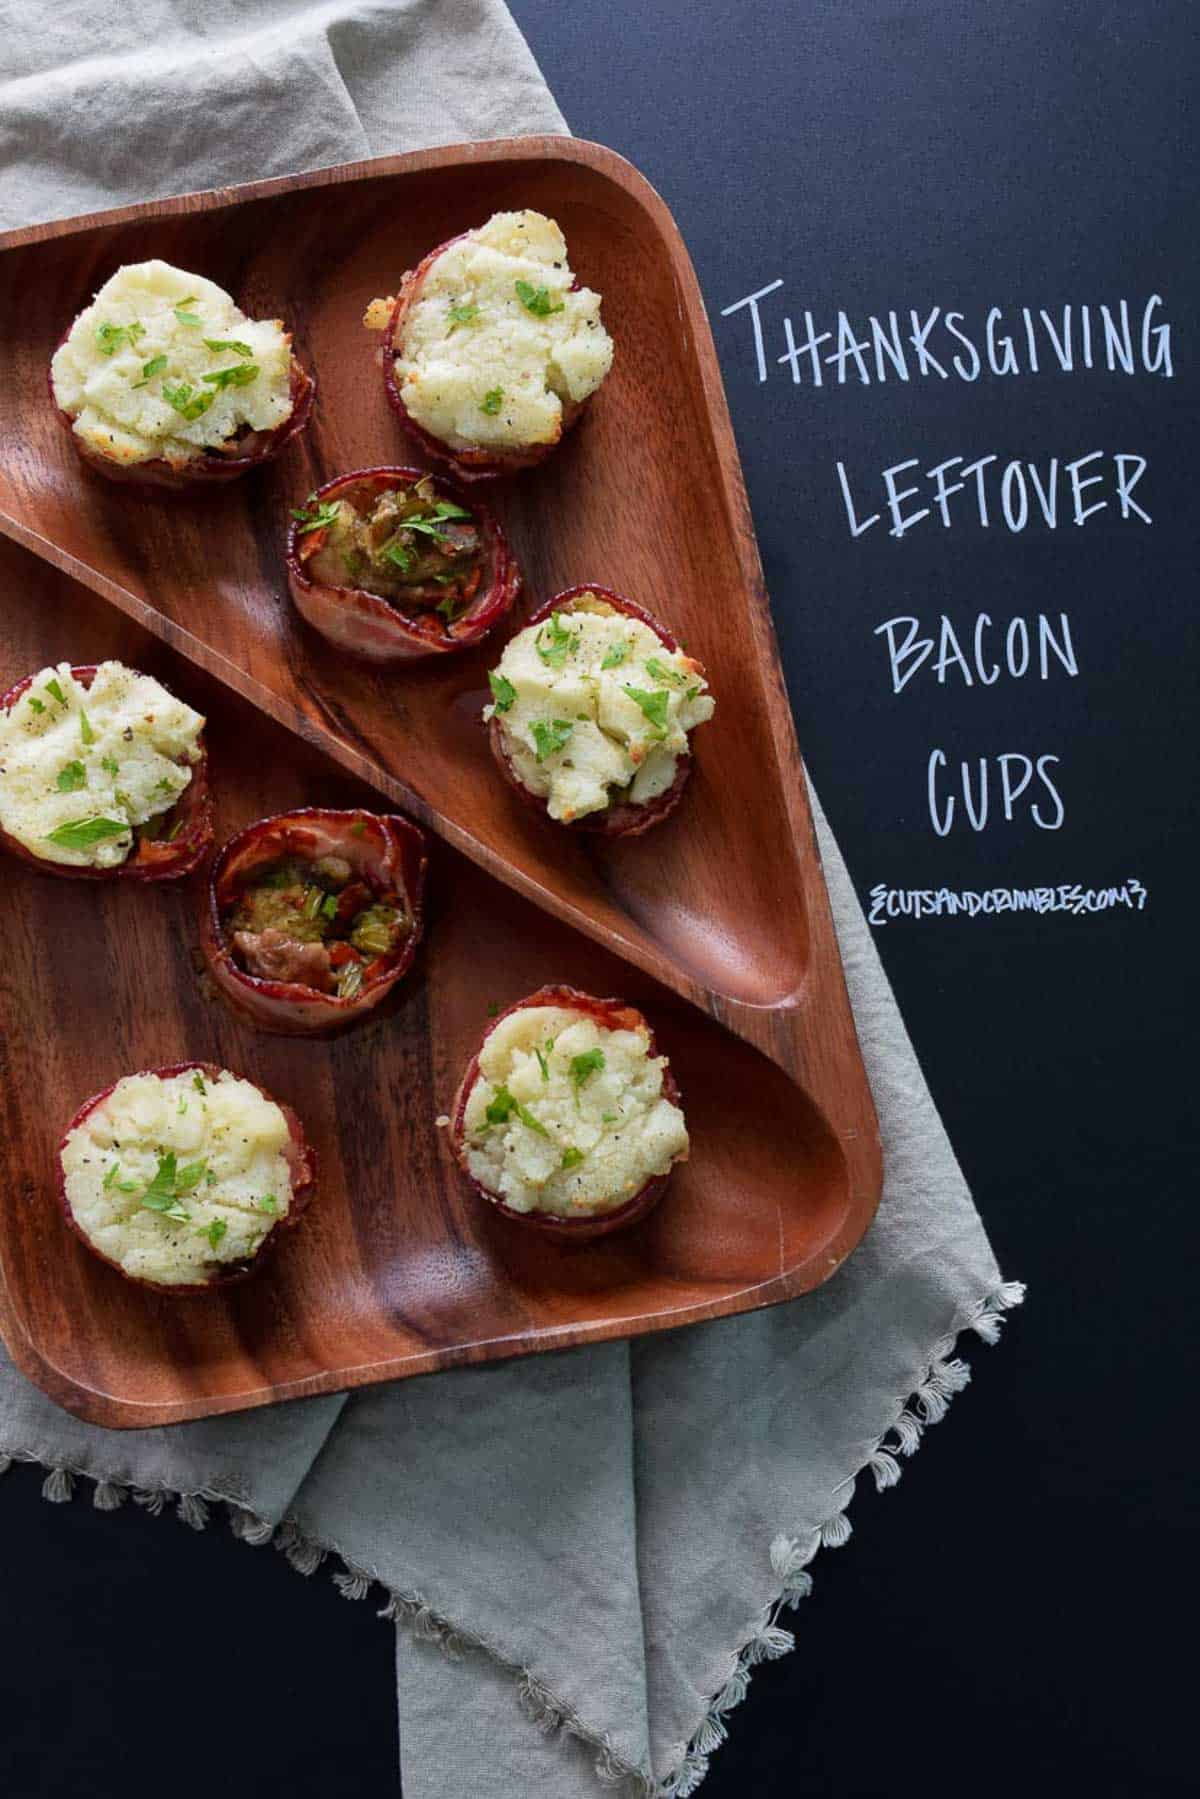 Thanksgiving Leftover Bacon Cups on brown serving platter with title written on chalkboard